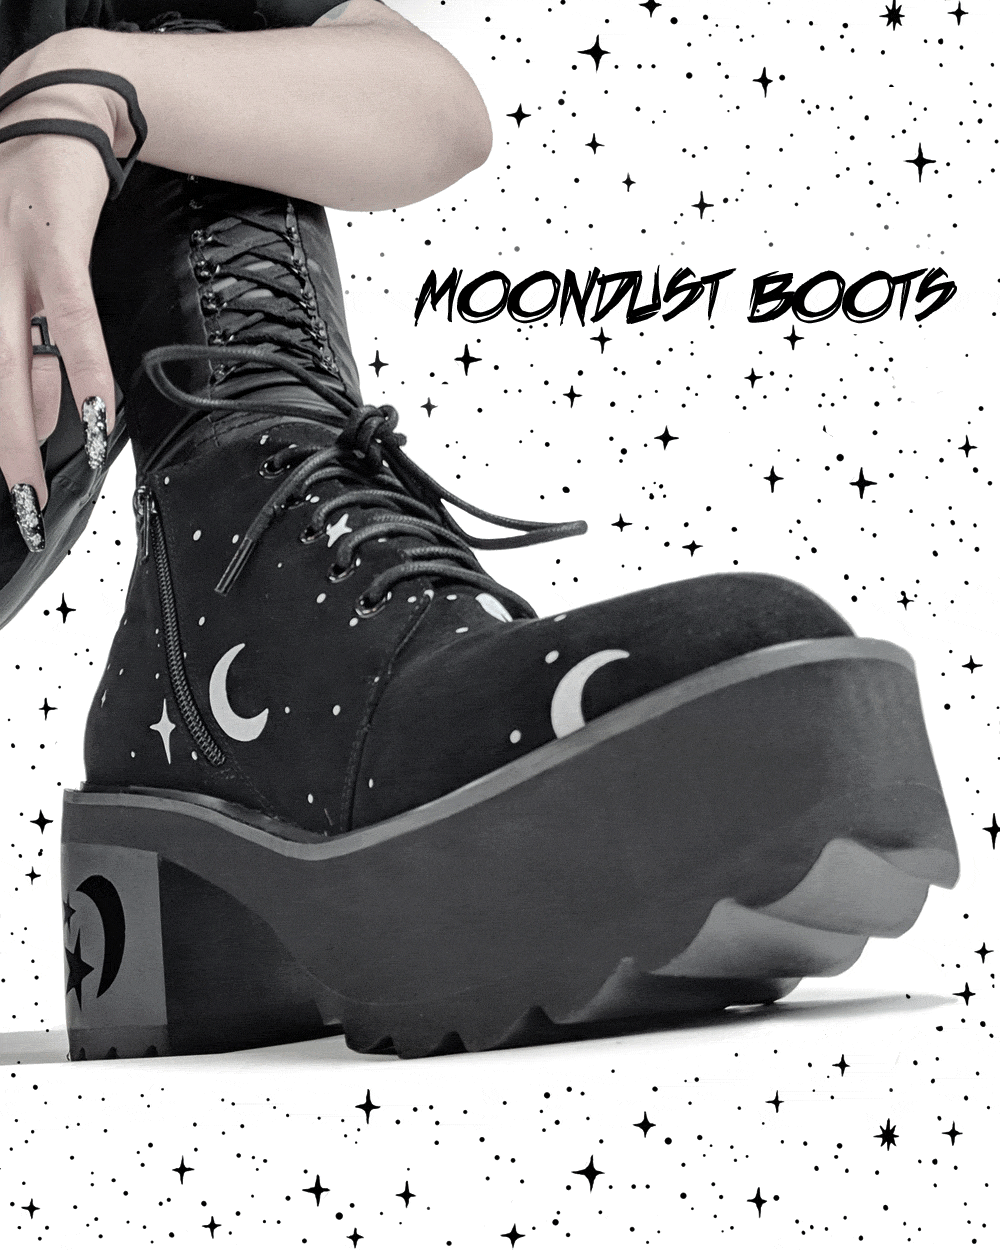 MoonDust Platform Heel Boots - Luxurious Quality Vegan Suede Goth Shoes with Moons & Stars, Witchy Alt Style, Occult Grunge Aesthetic, Soft Memory foam inner panels